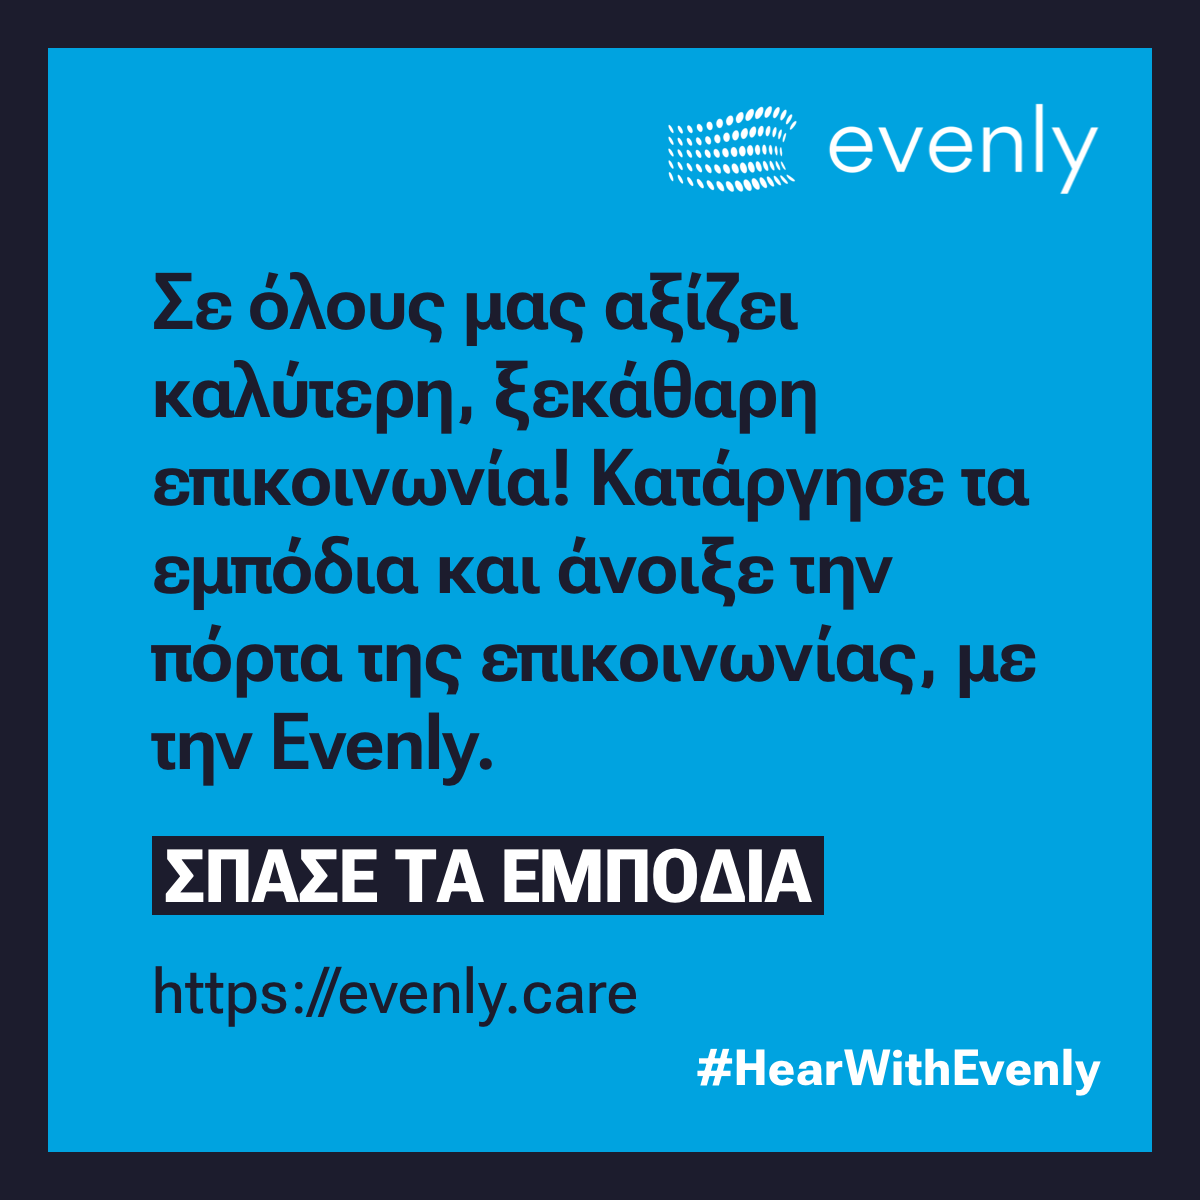 HearWithEvenly